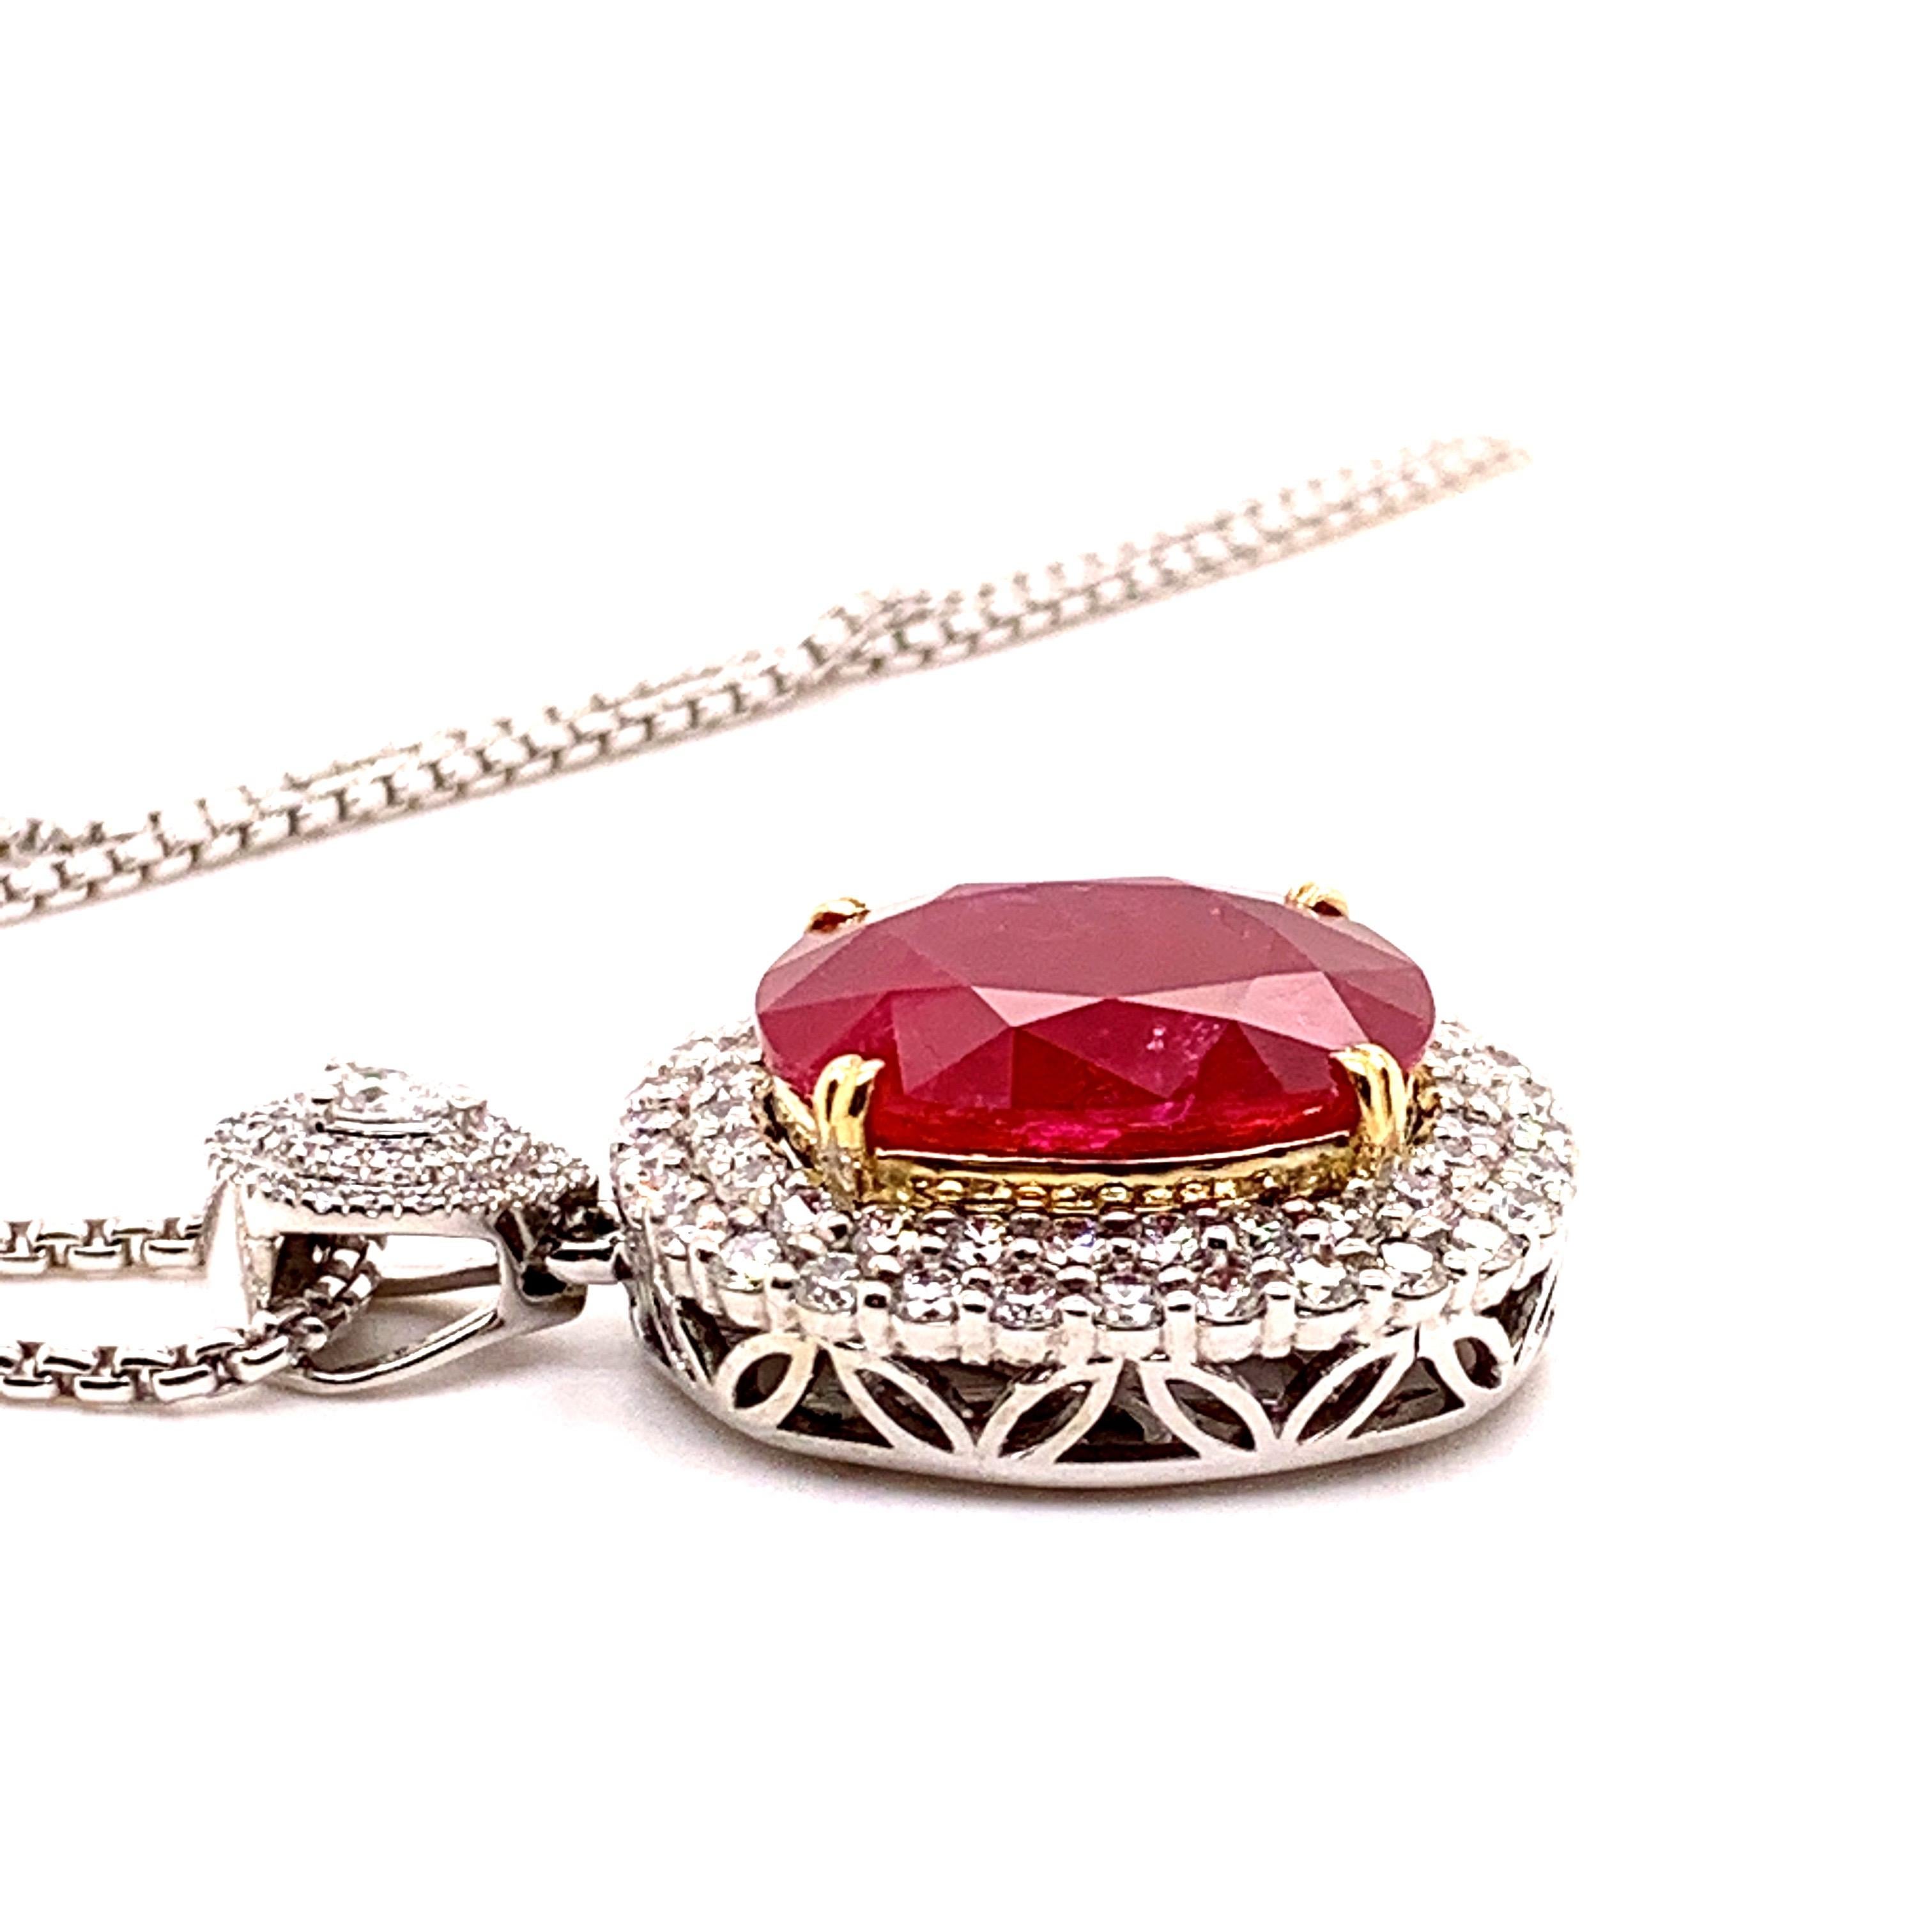 Glamorous large ruby diamond pendant necklace. Intense fiery red, high luster, cushion faceted, 24.21 carats natural ruby mounted in high profile with yellow gold eight knife prongs, accented with two rows of round brilliant cut diamonds, bail with